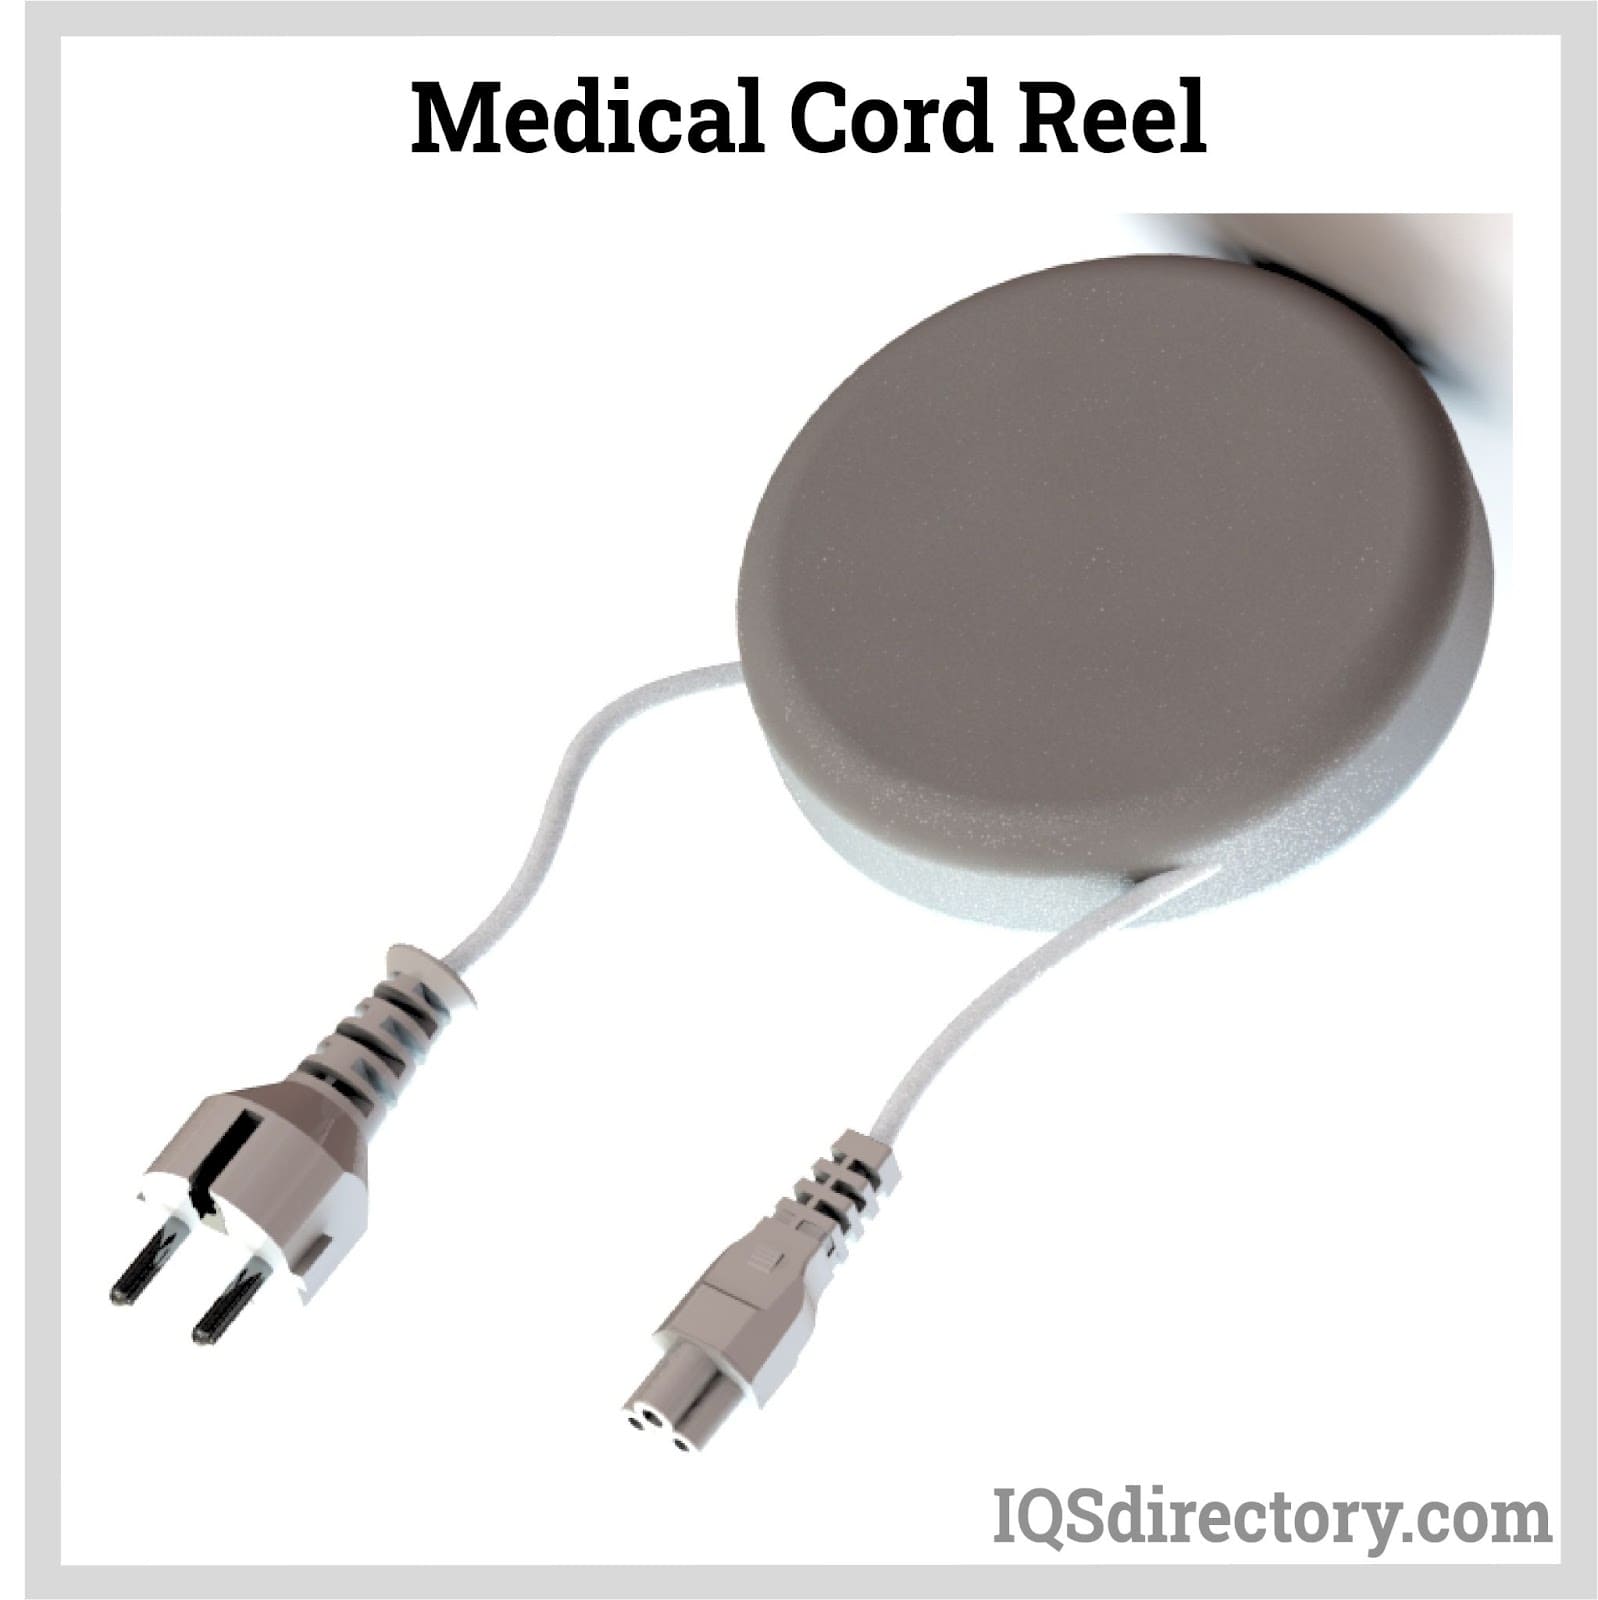 Cord Reels: Types, Configurations, Selection, and Requirements